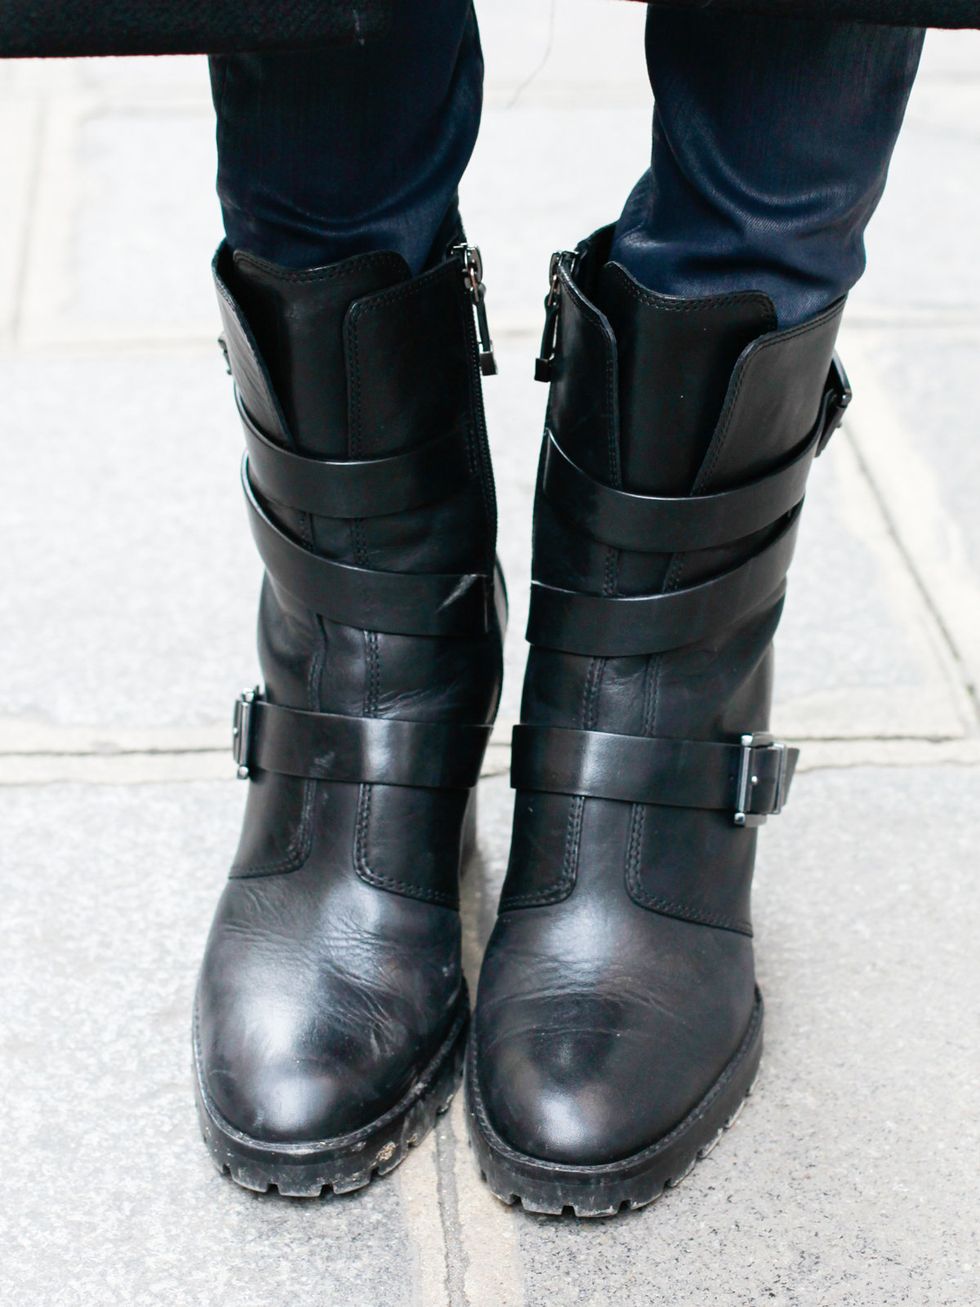 Footwear, Boot, Leather, Fashion, Riding boot, Knee-high boot, Motorcycle boot, 